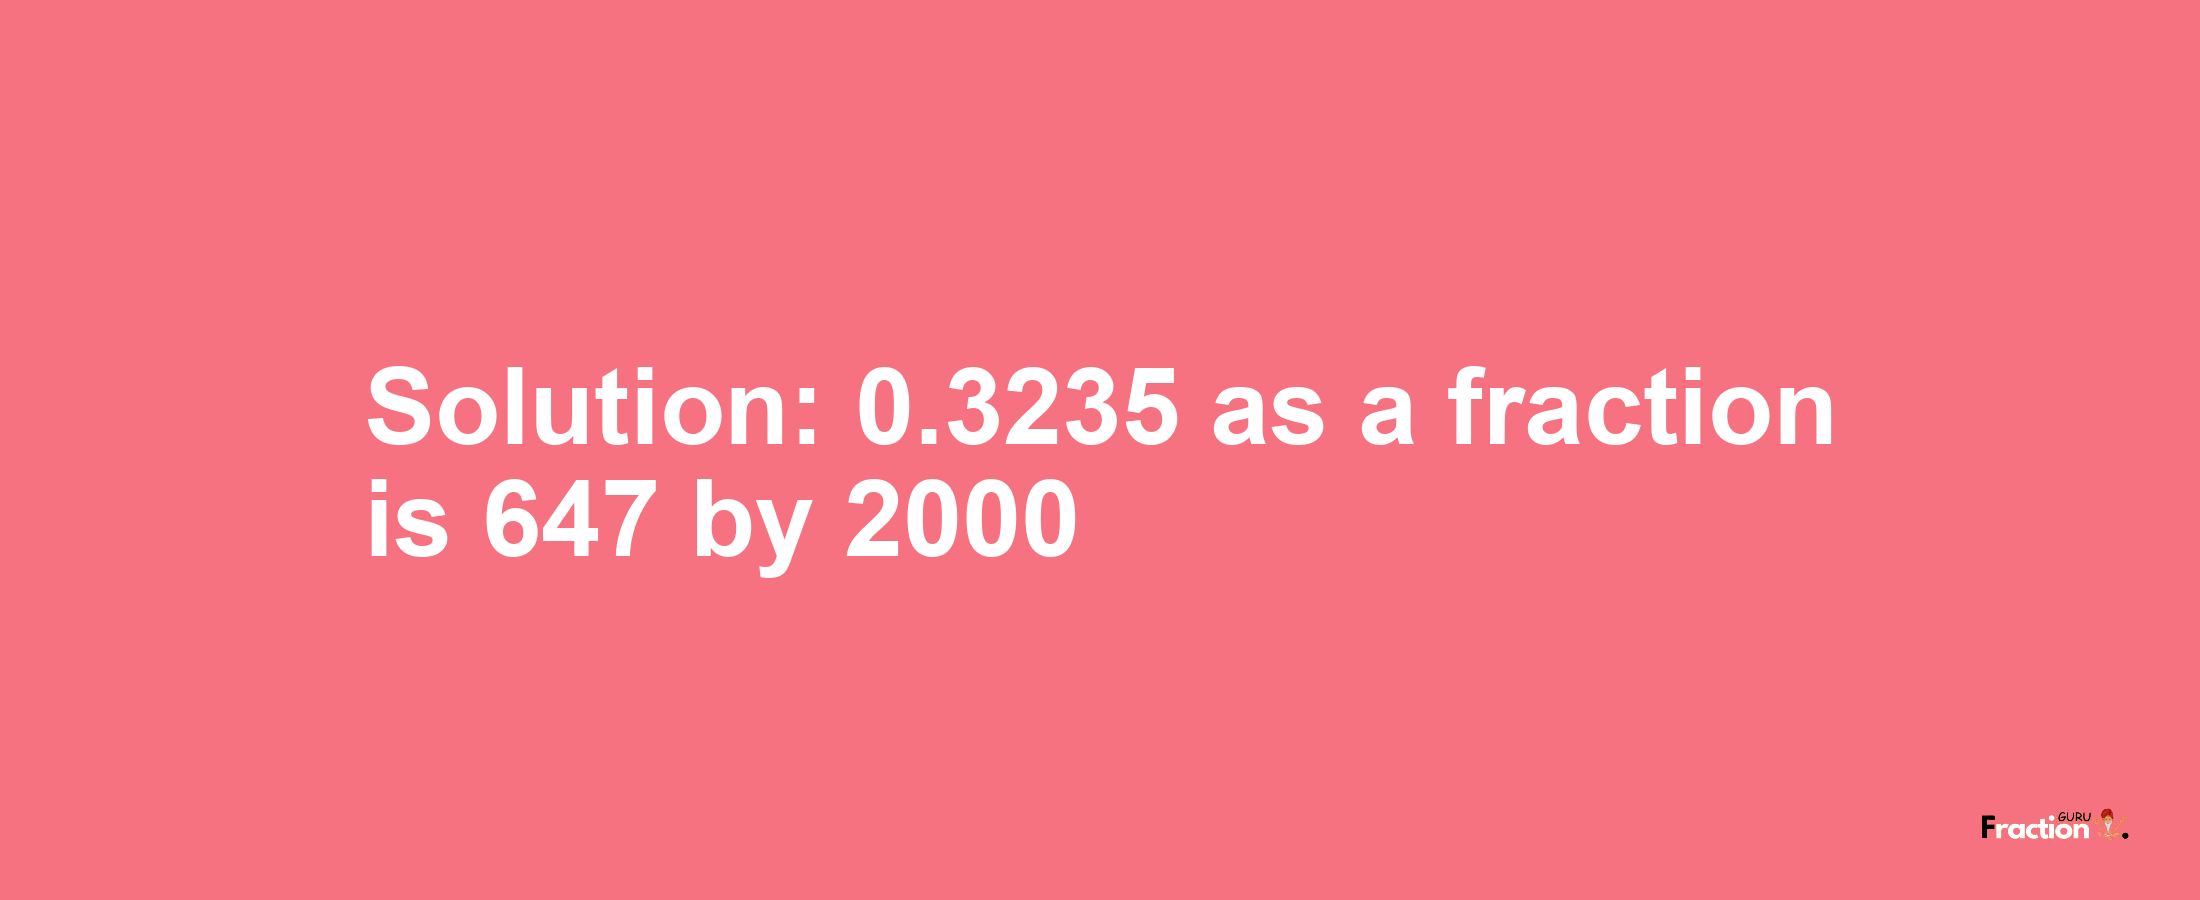 Solution:0.3235 as a fraction is 647/2000